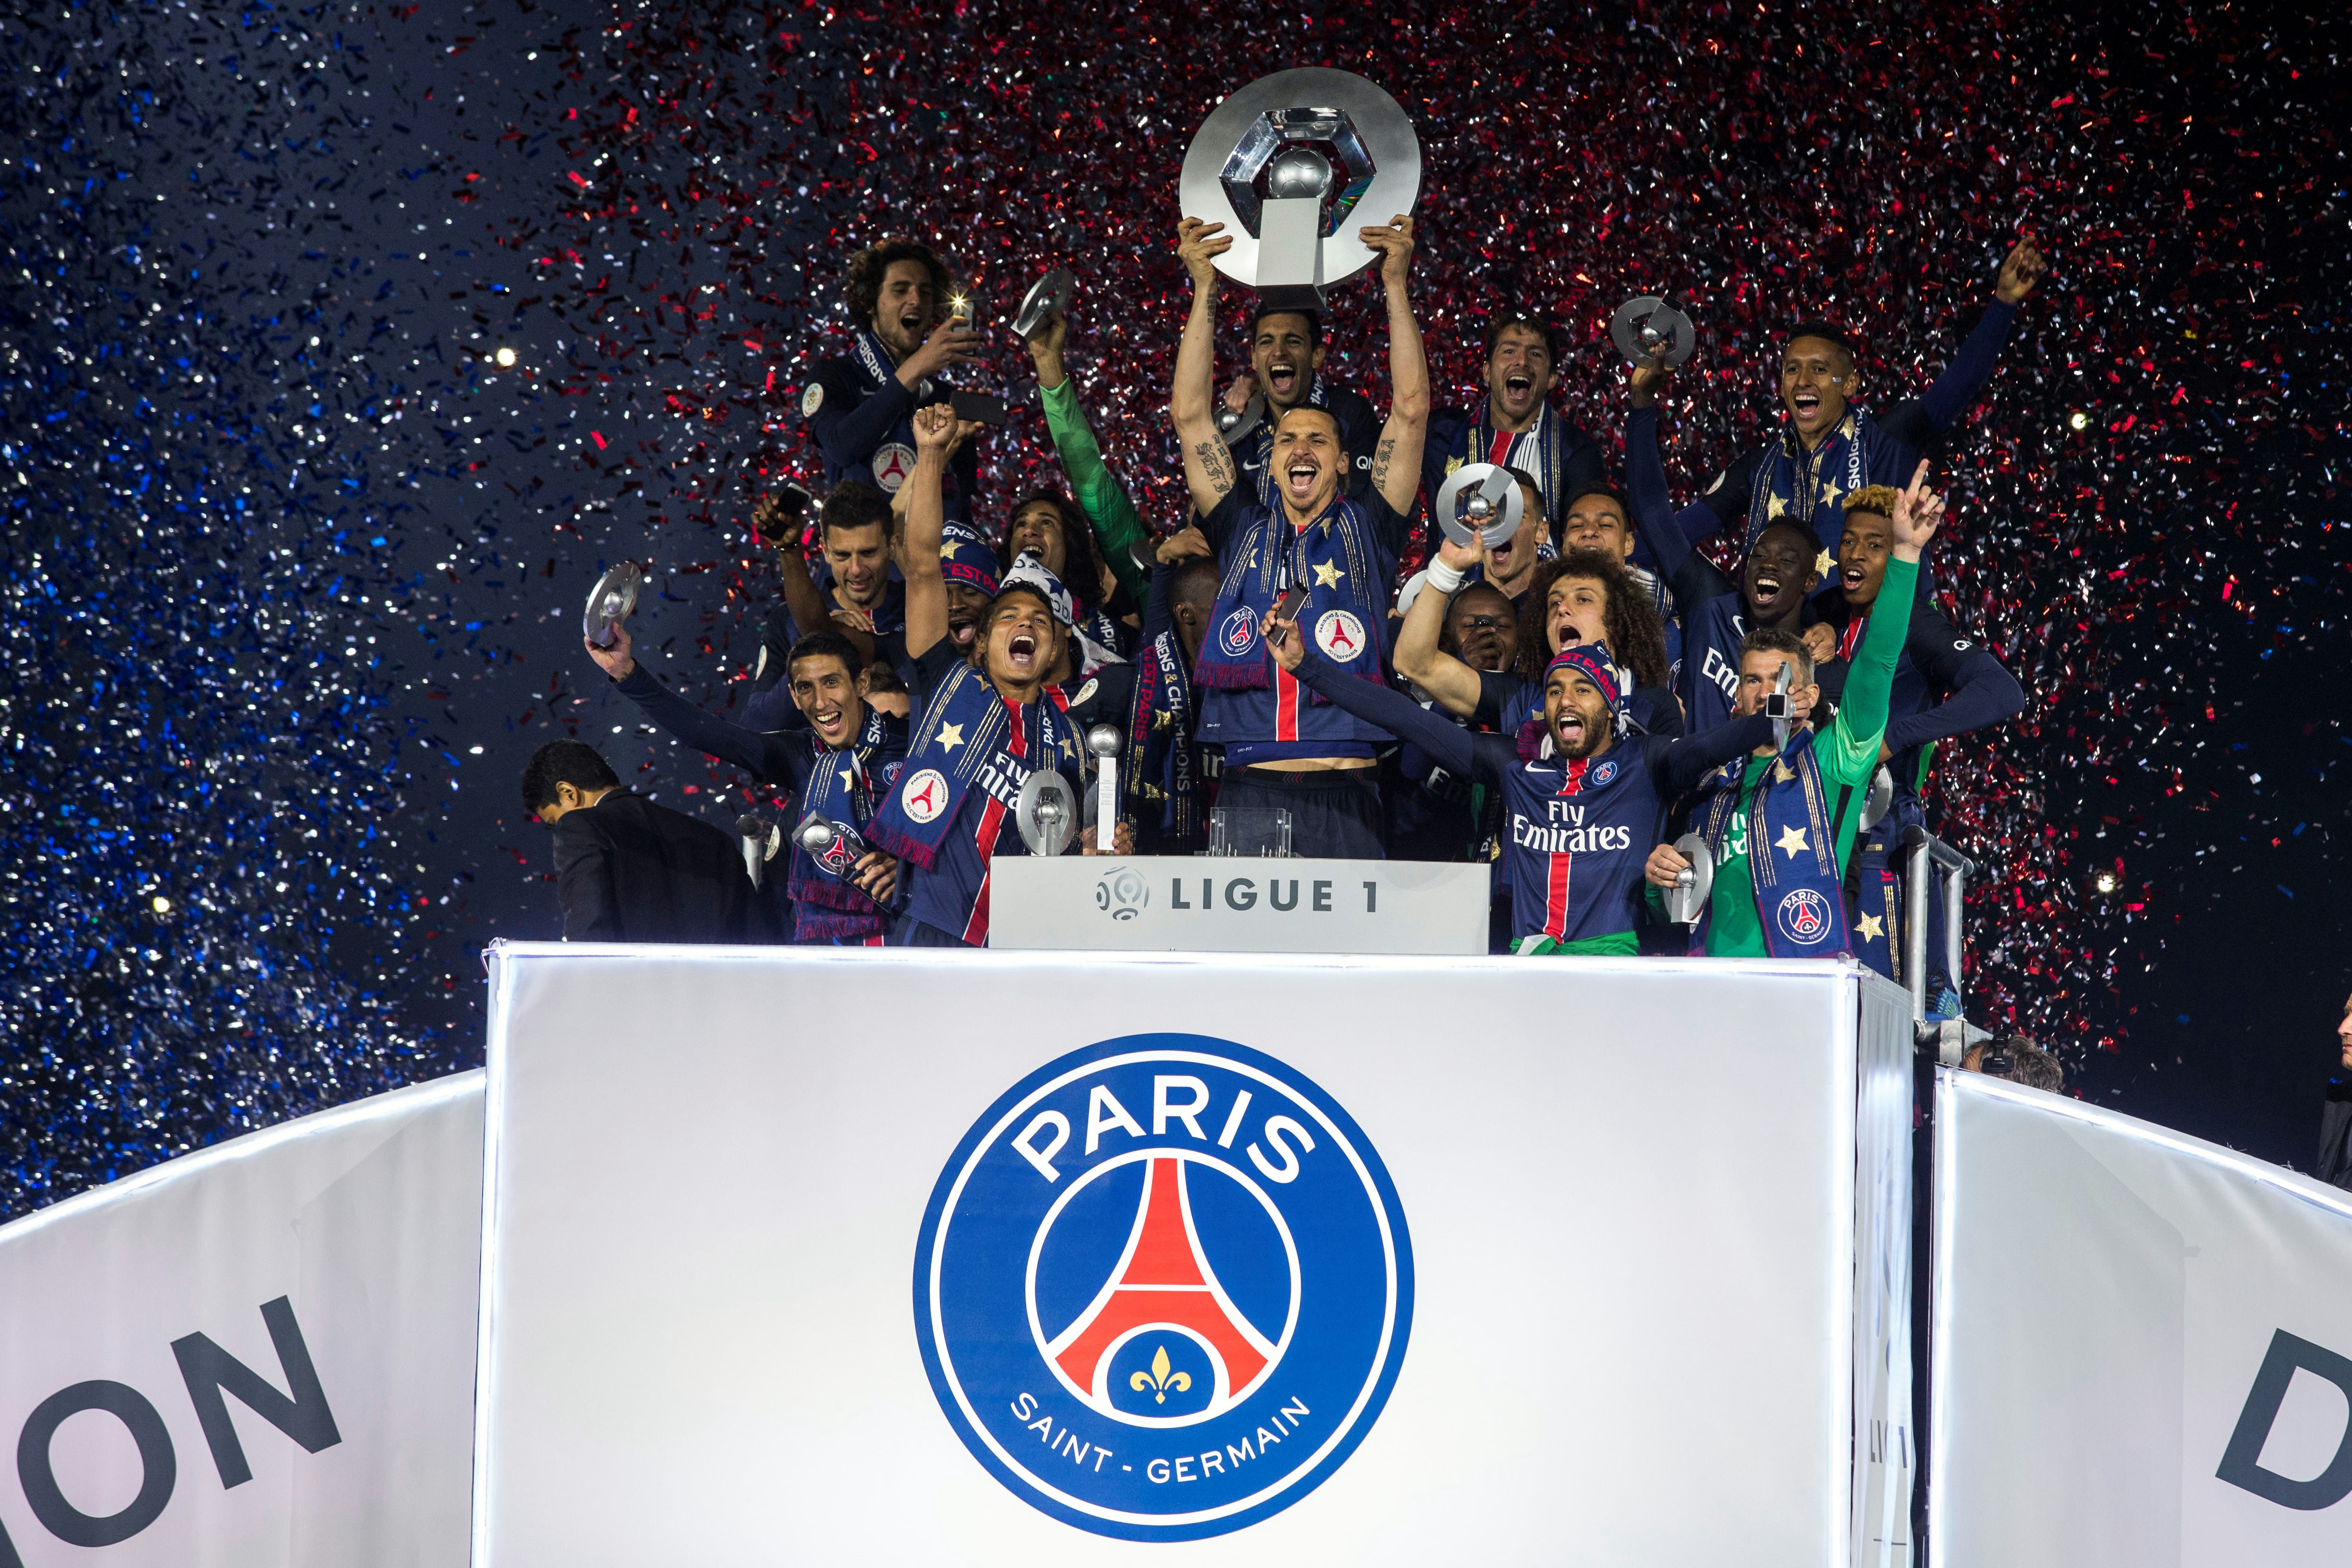 PSG News: 5 reasons they will win Ligue 1 again this season